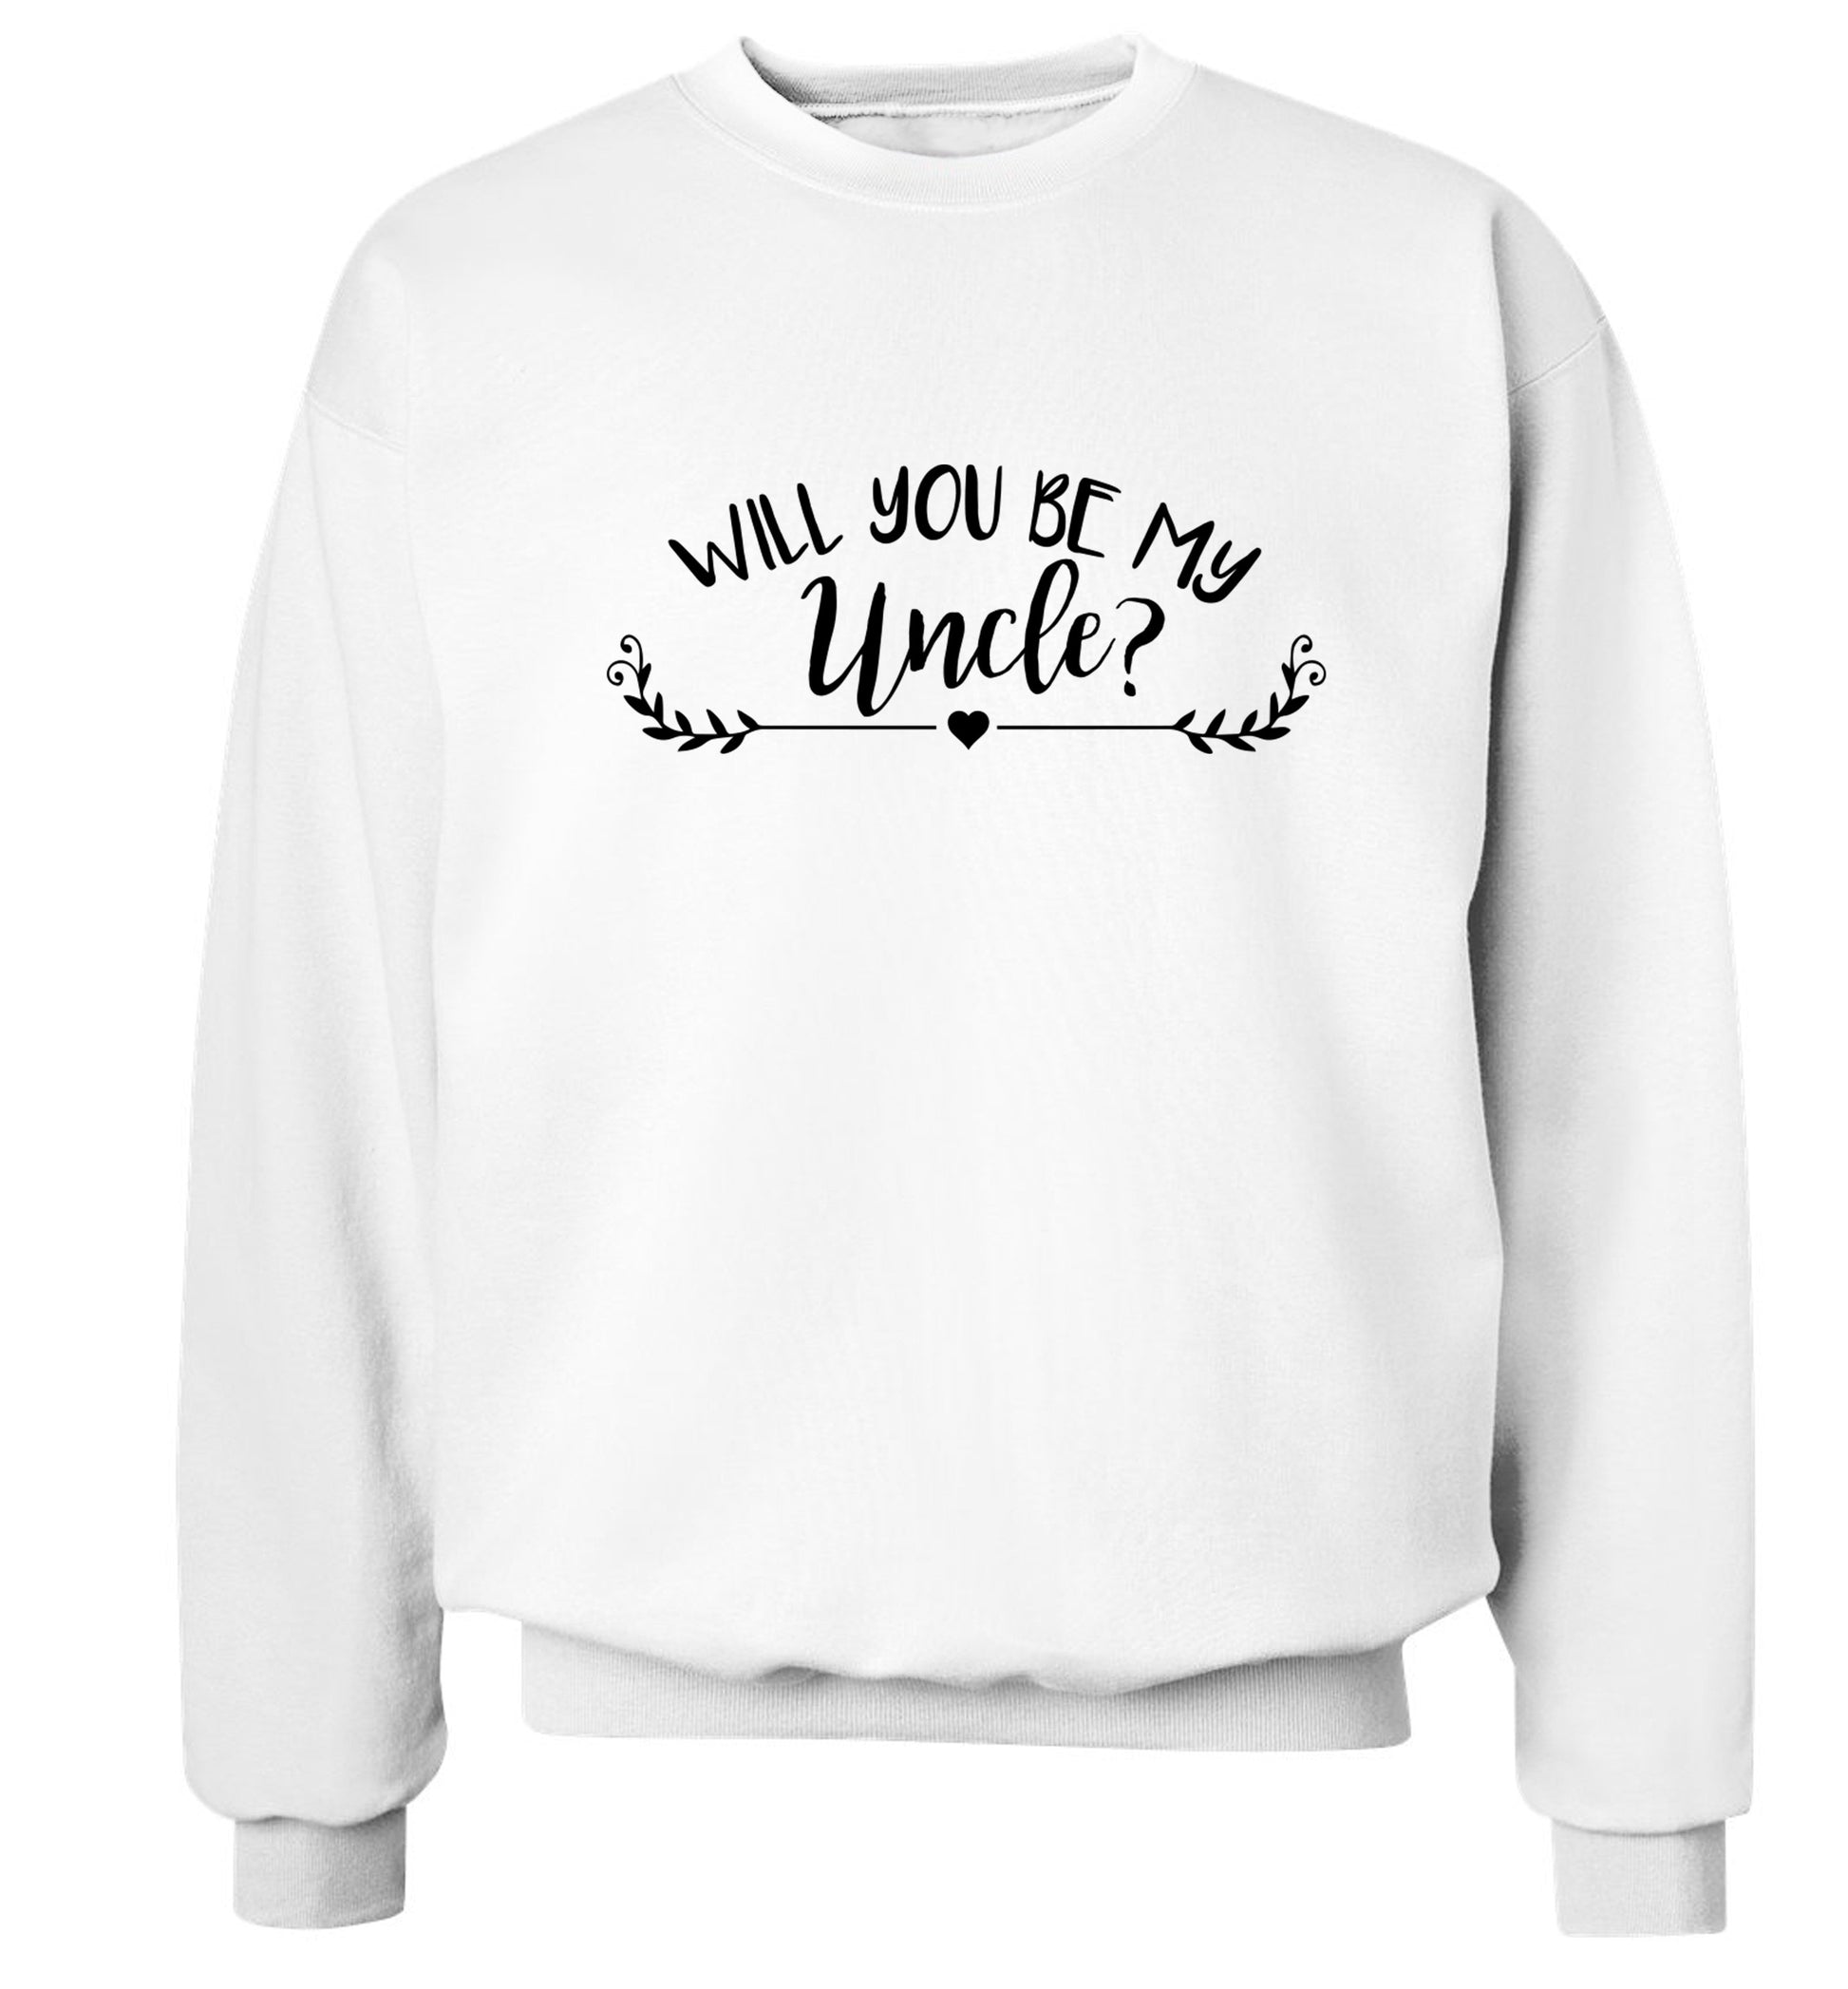 Will you be my uncle? Adult's unisex white Sweater 2XL